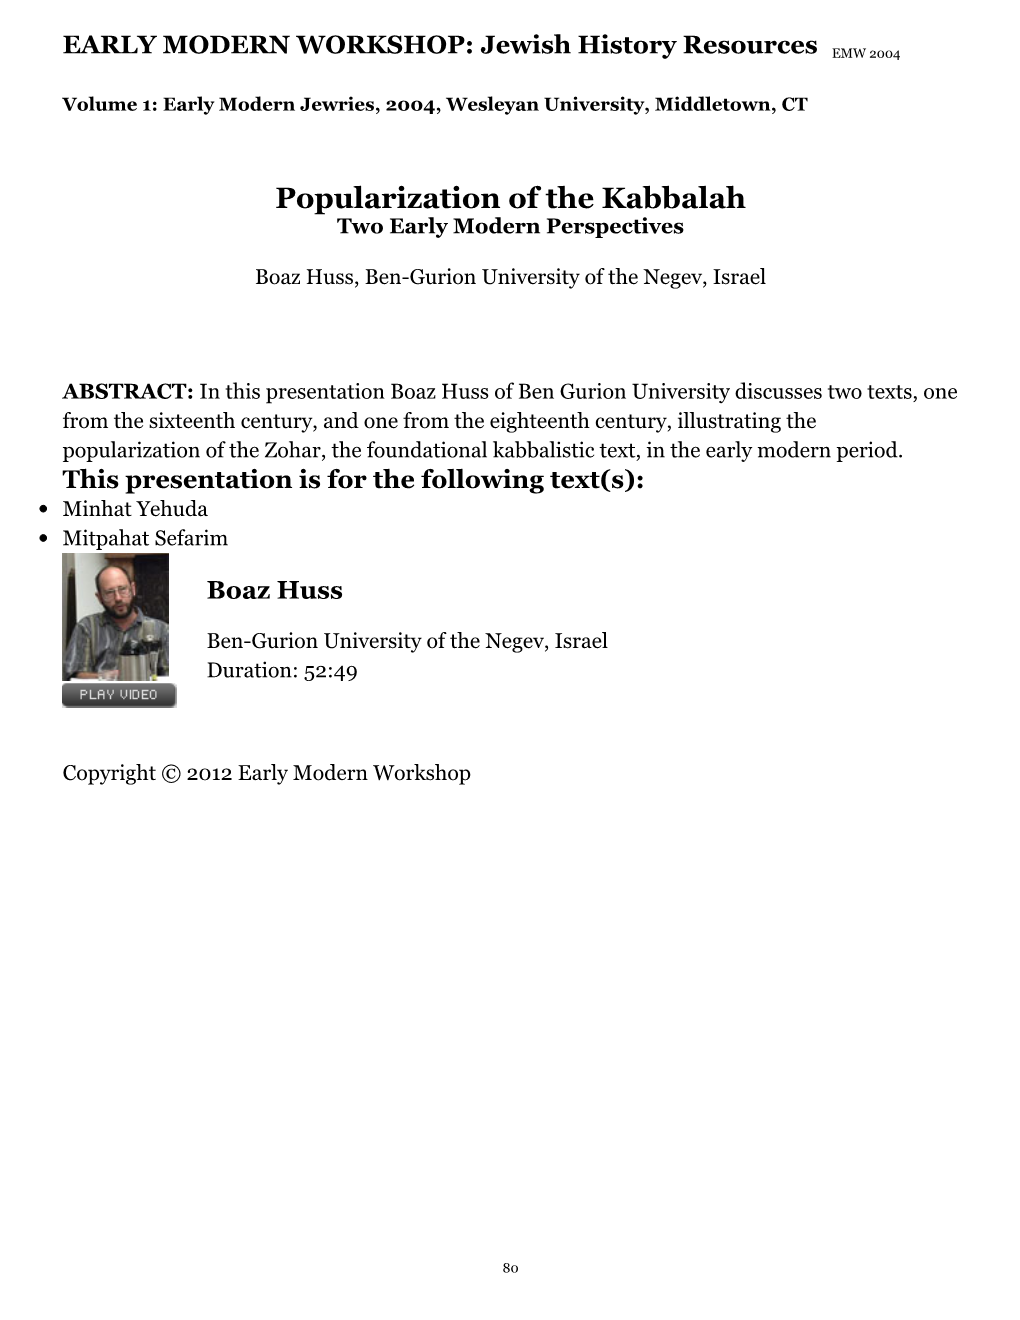 Popularization of the Kabbalah Two Early Modern Perspectives